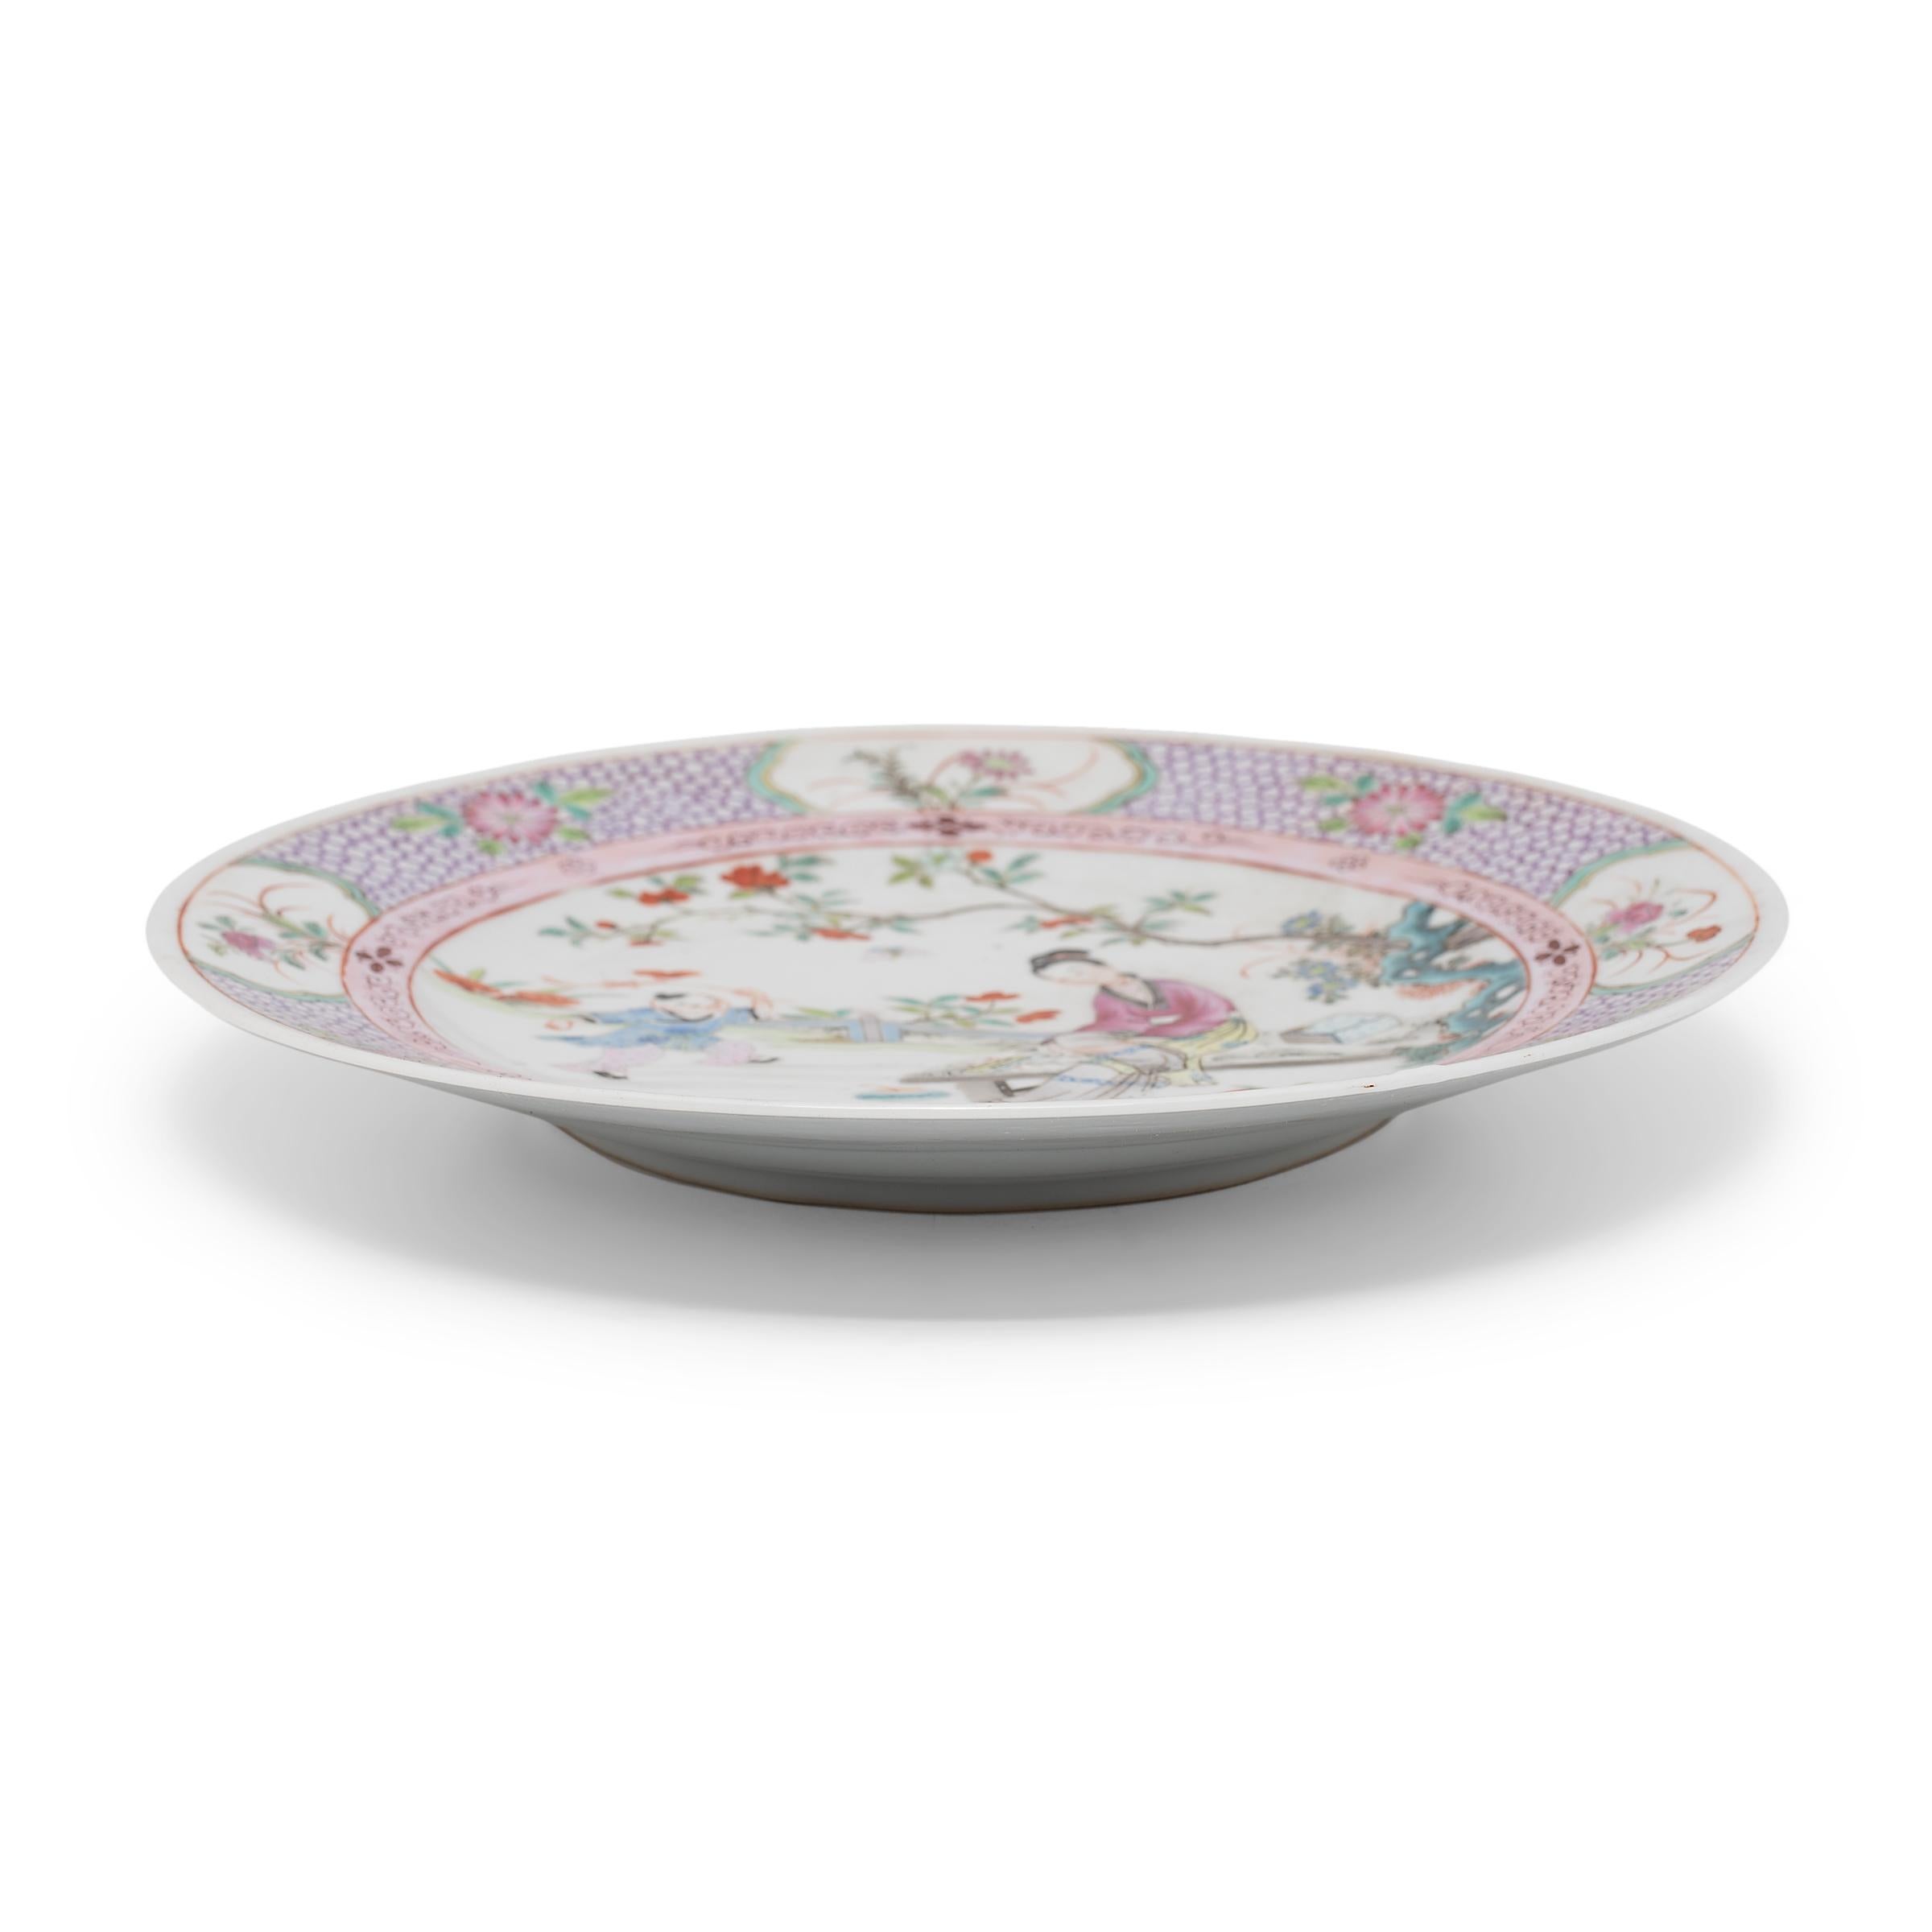 Chinese Export Pair of Chinese Famille Rose Plates with Garden Scenes, C. 1900 For Sale